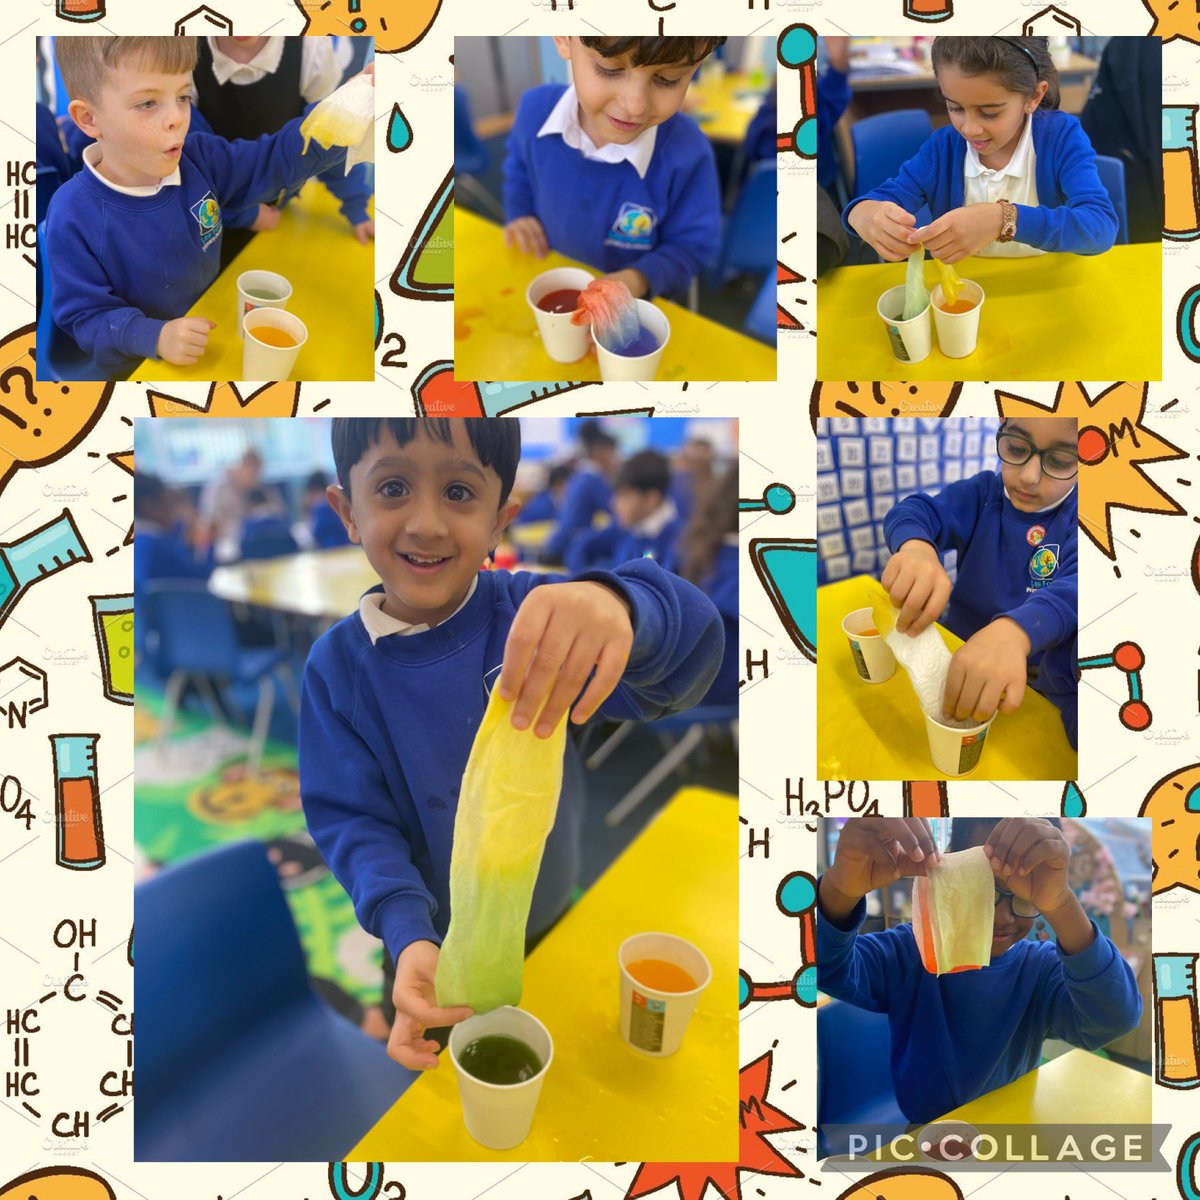 #LFP1EF had so much fun exploring colours in our science experiment this afternoon. We are enjoying #BritishScienceWeek very much! 
@lea_forest_aet @Lea_Forest_HT @fiona_hartwell @SCKR1977